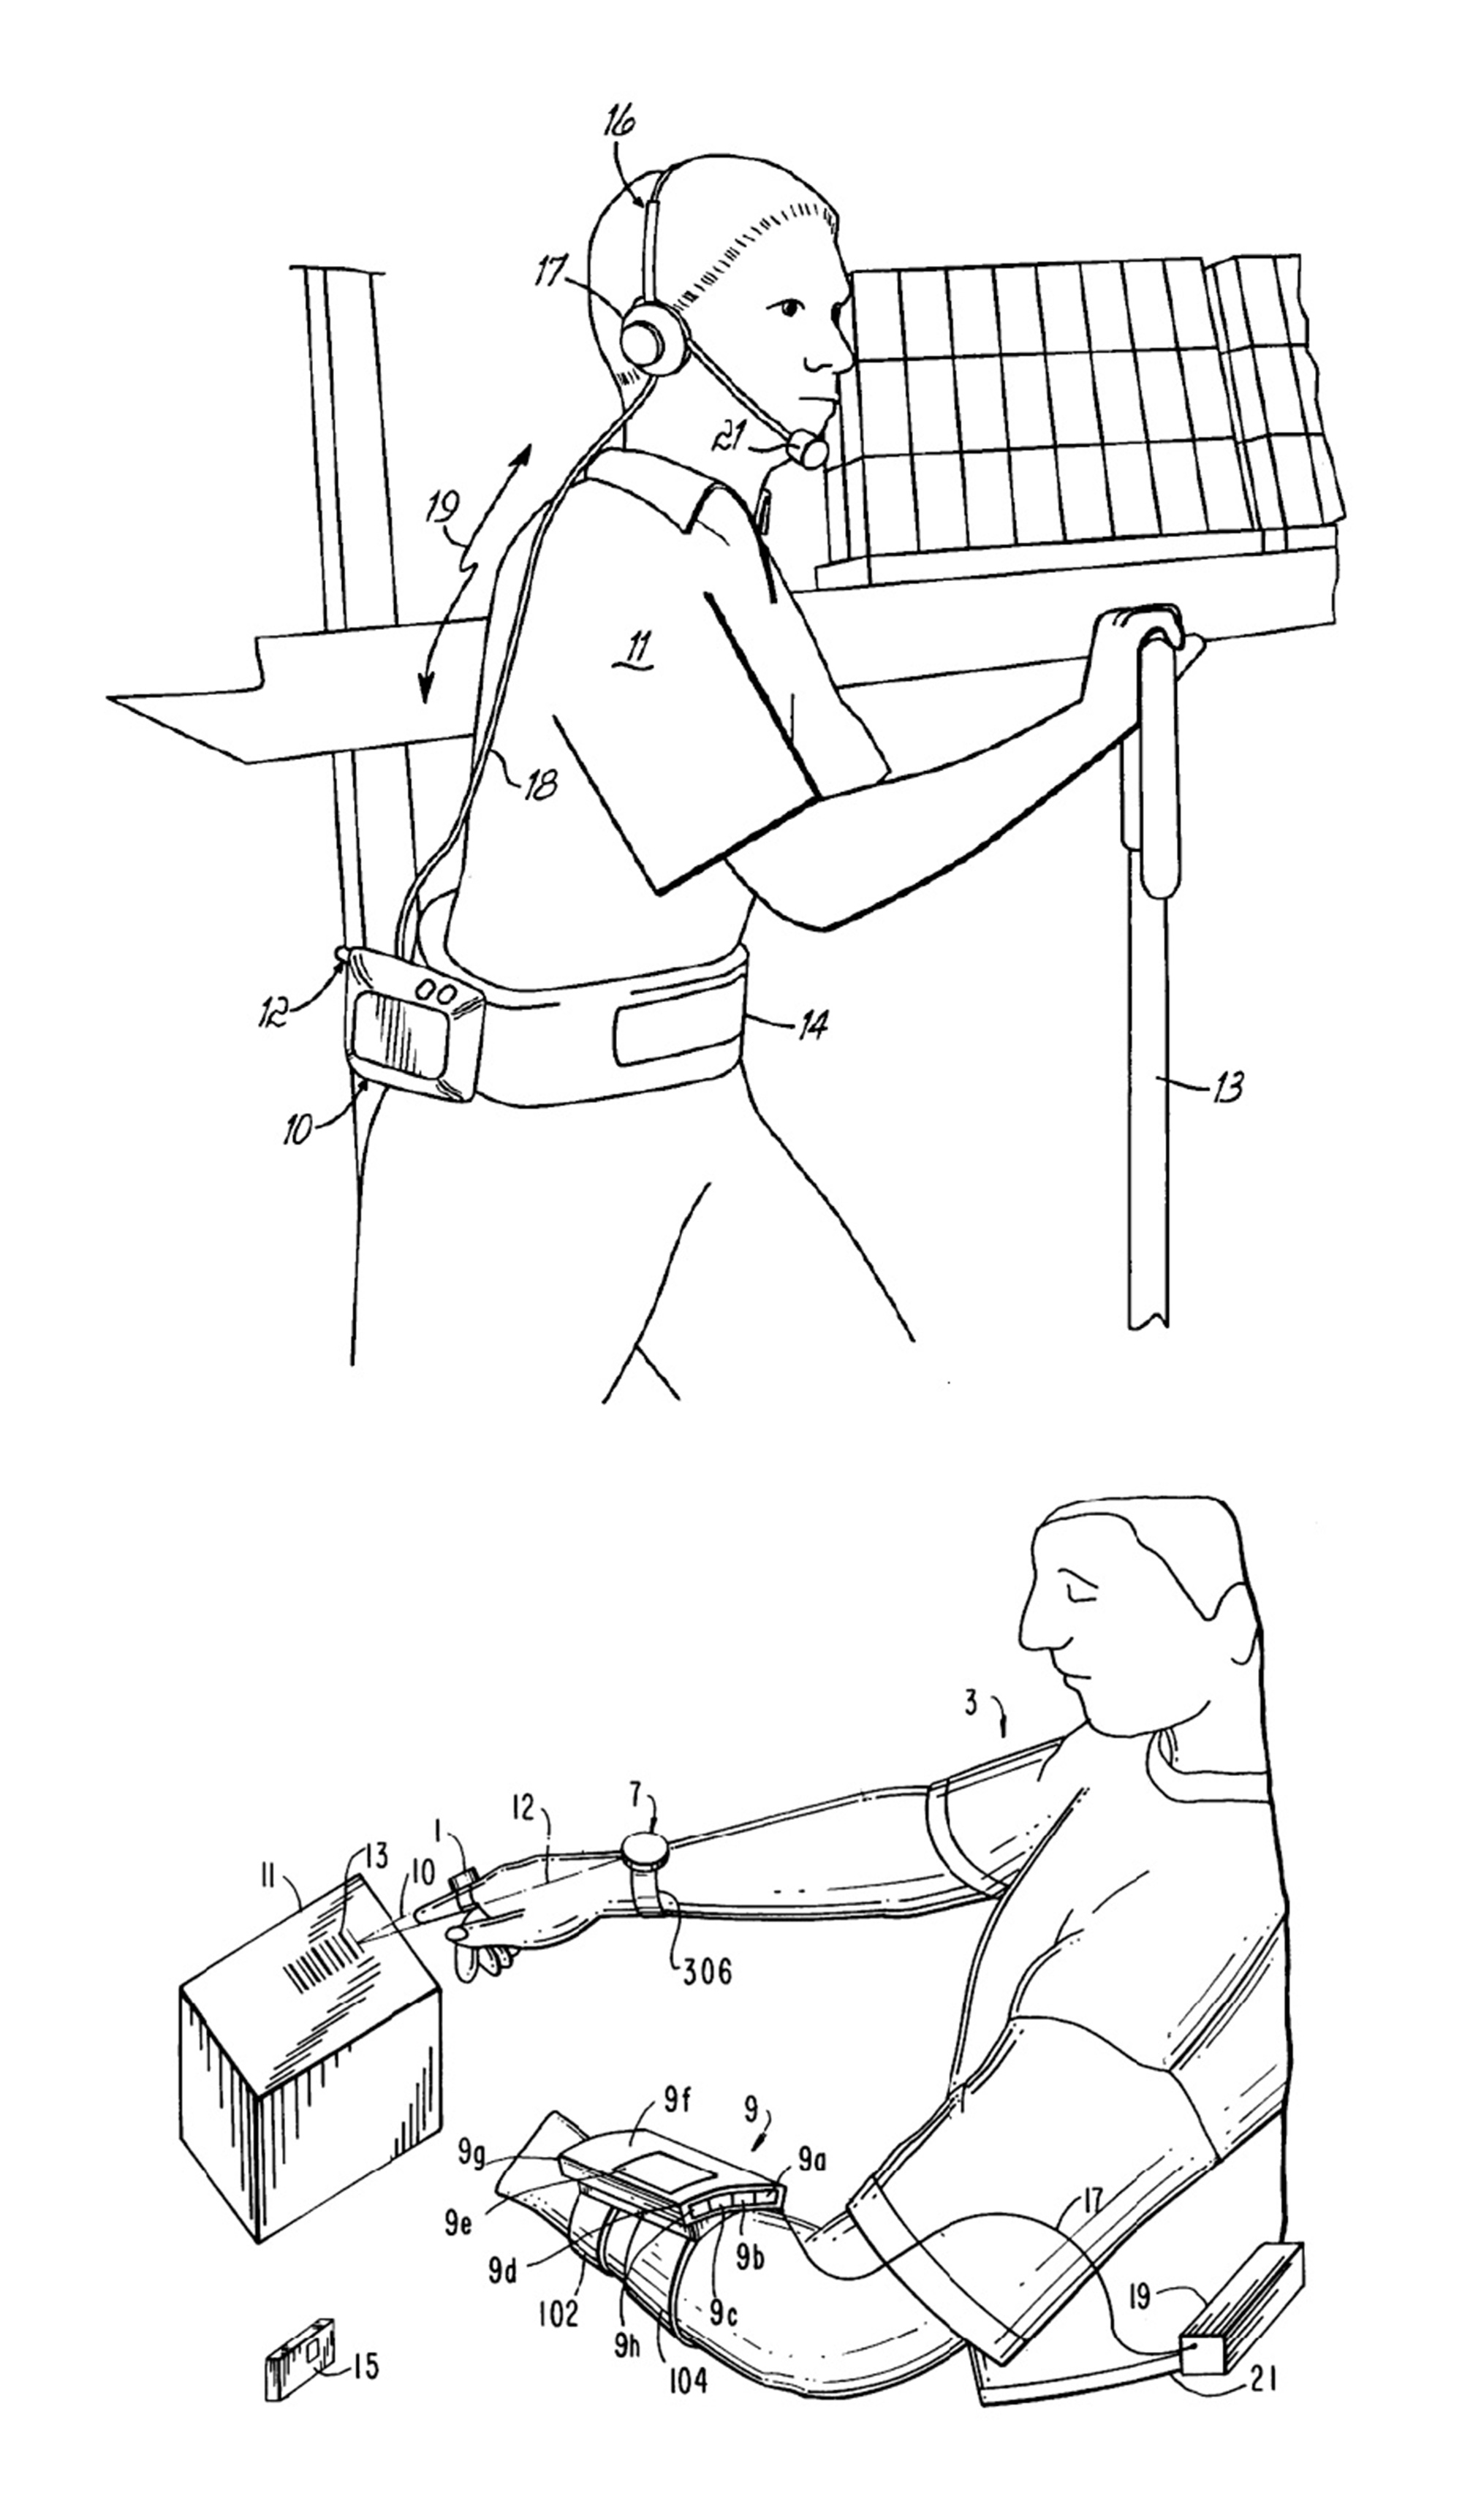 Two images. On top: an illustration for two thousand and seven US patent publication. It shows the implementation of Lucas Systems’s personal wearable computers for their Jennifer VoicePlus voice-directed picking system. On the bottom: a drawing for a nineteen ninety nine US patent by Motorola’. It includes the ring used to scan bar codes and the readout attached to the forearm.